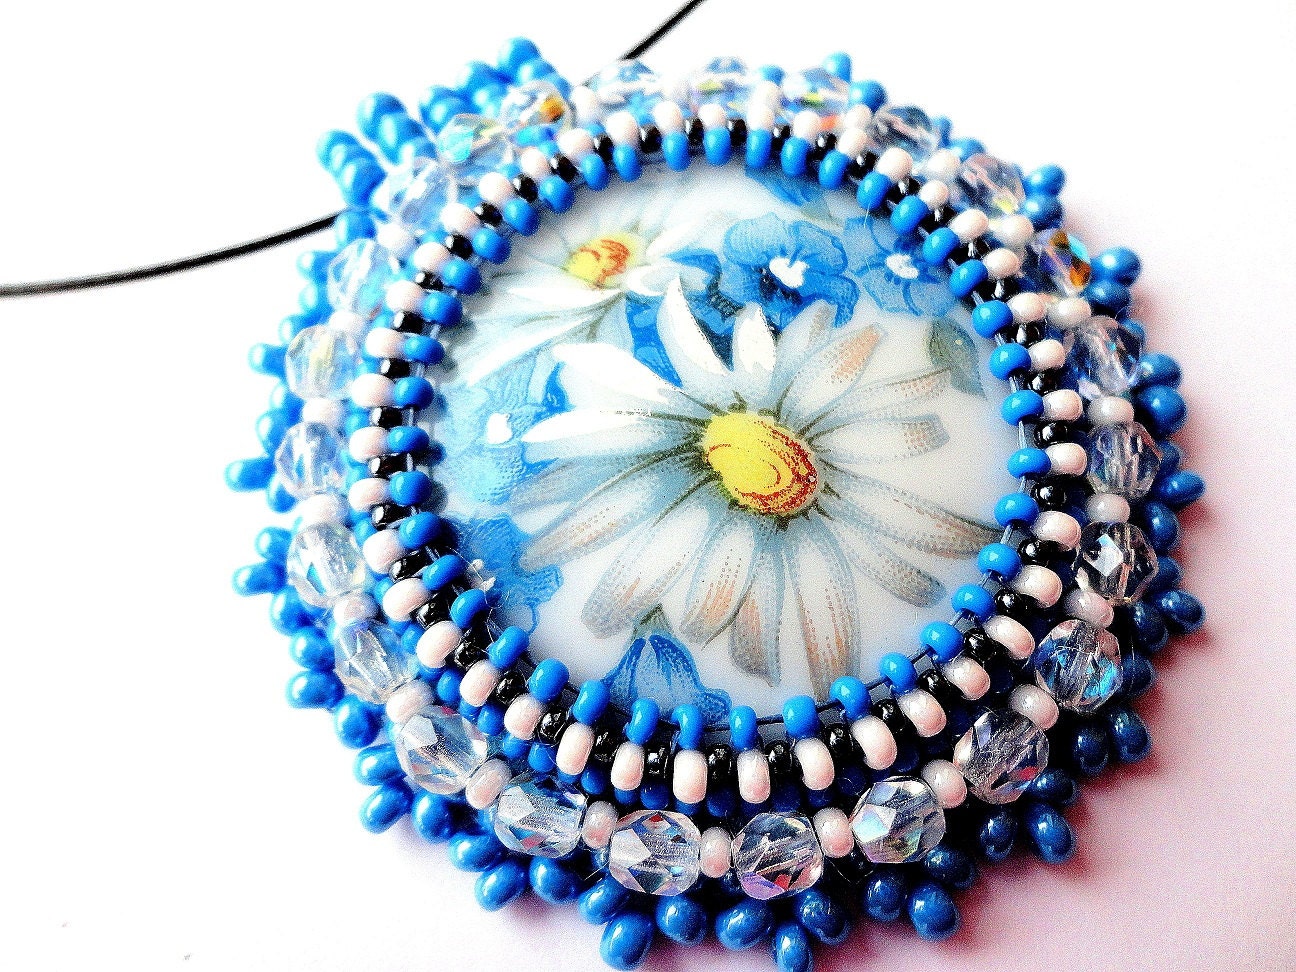 Daisy Necklace on Daisy Necklace  Embroidery Porcelain Cameo Necklace  Daisy Flower